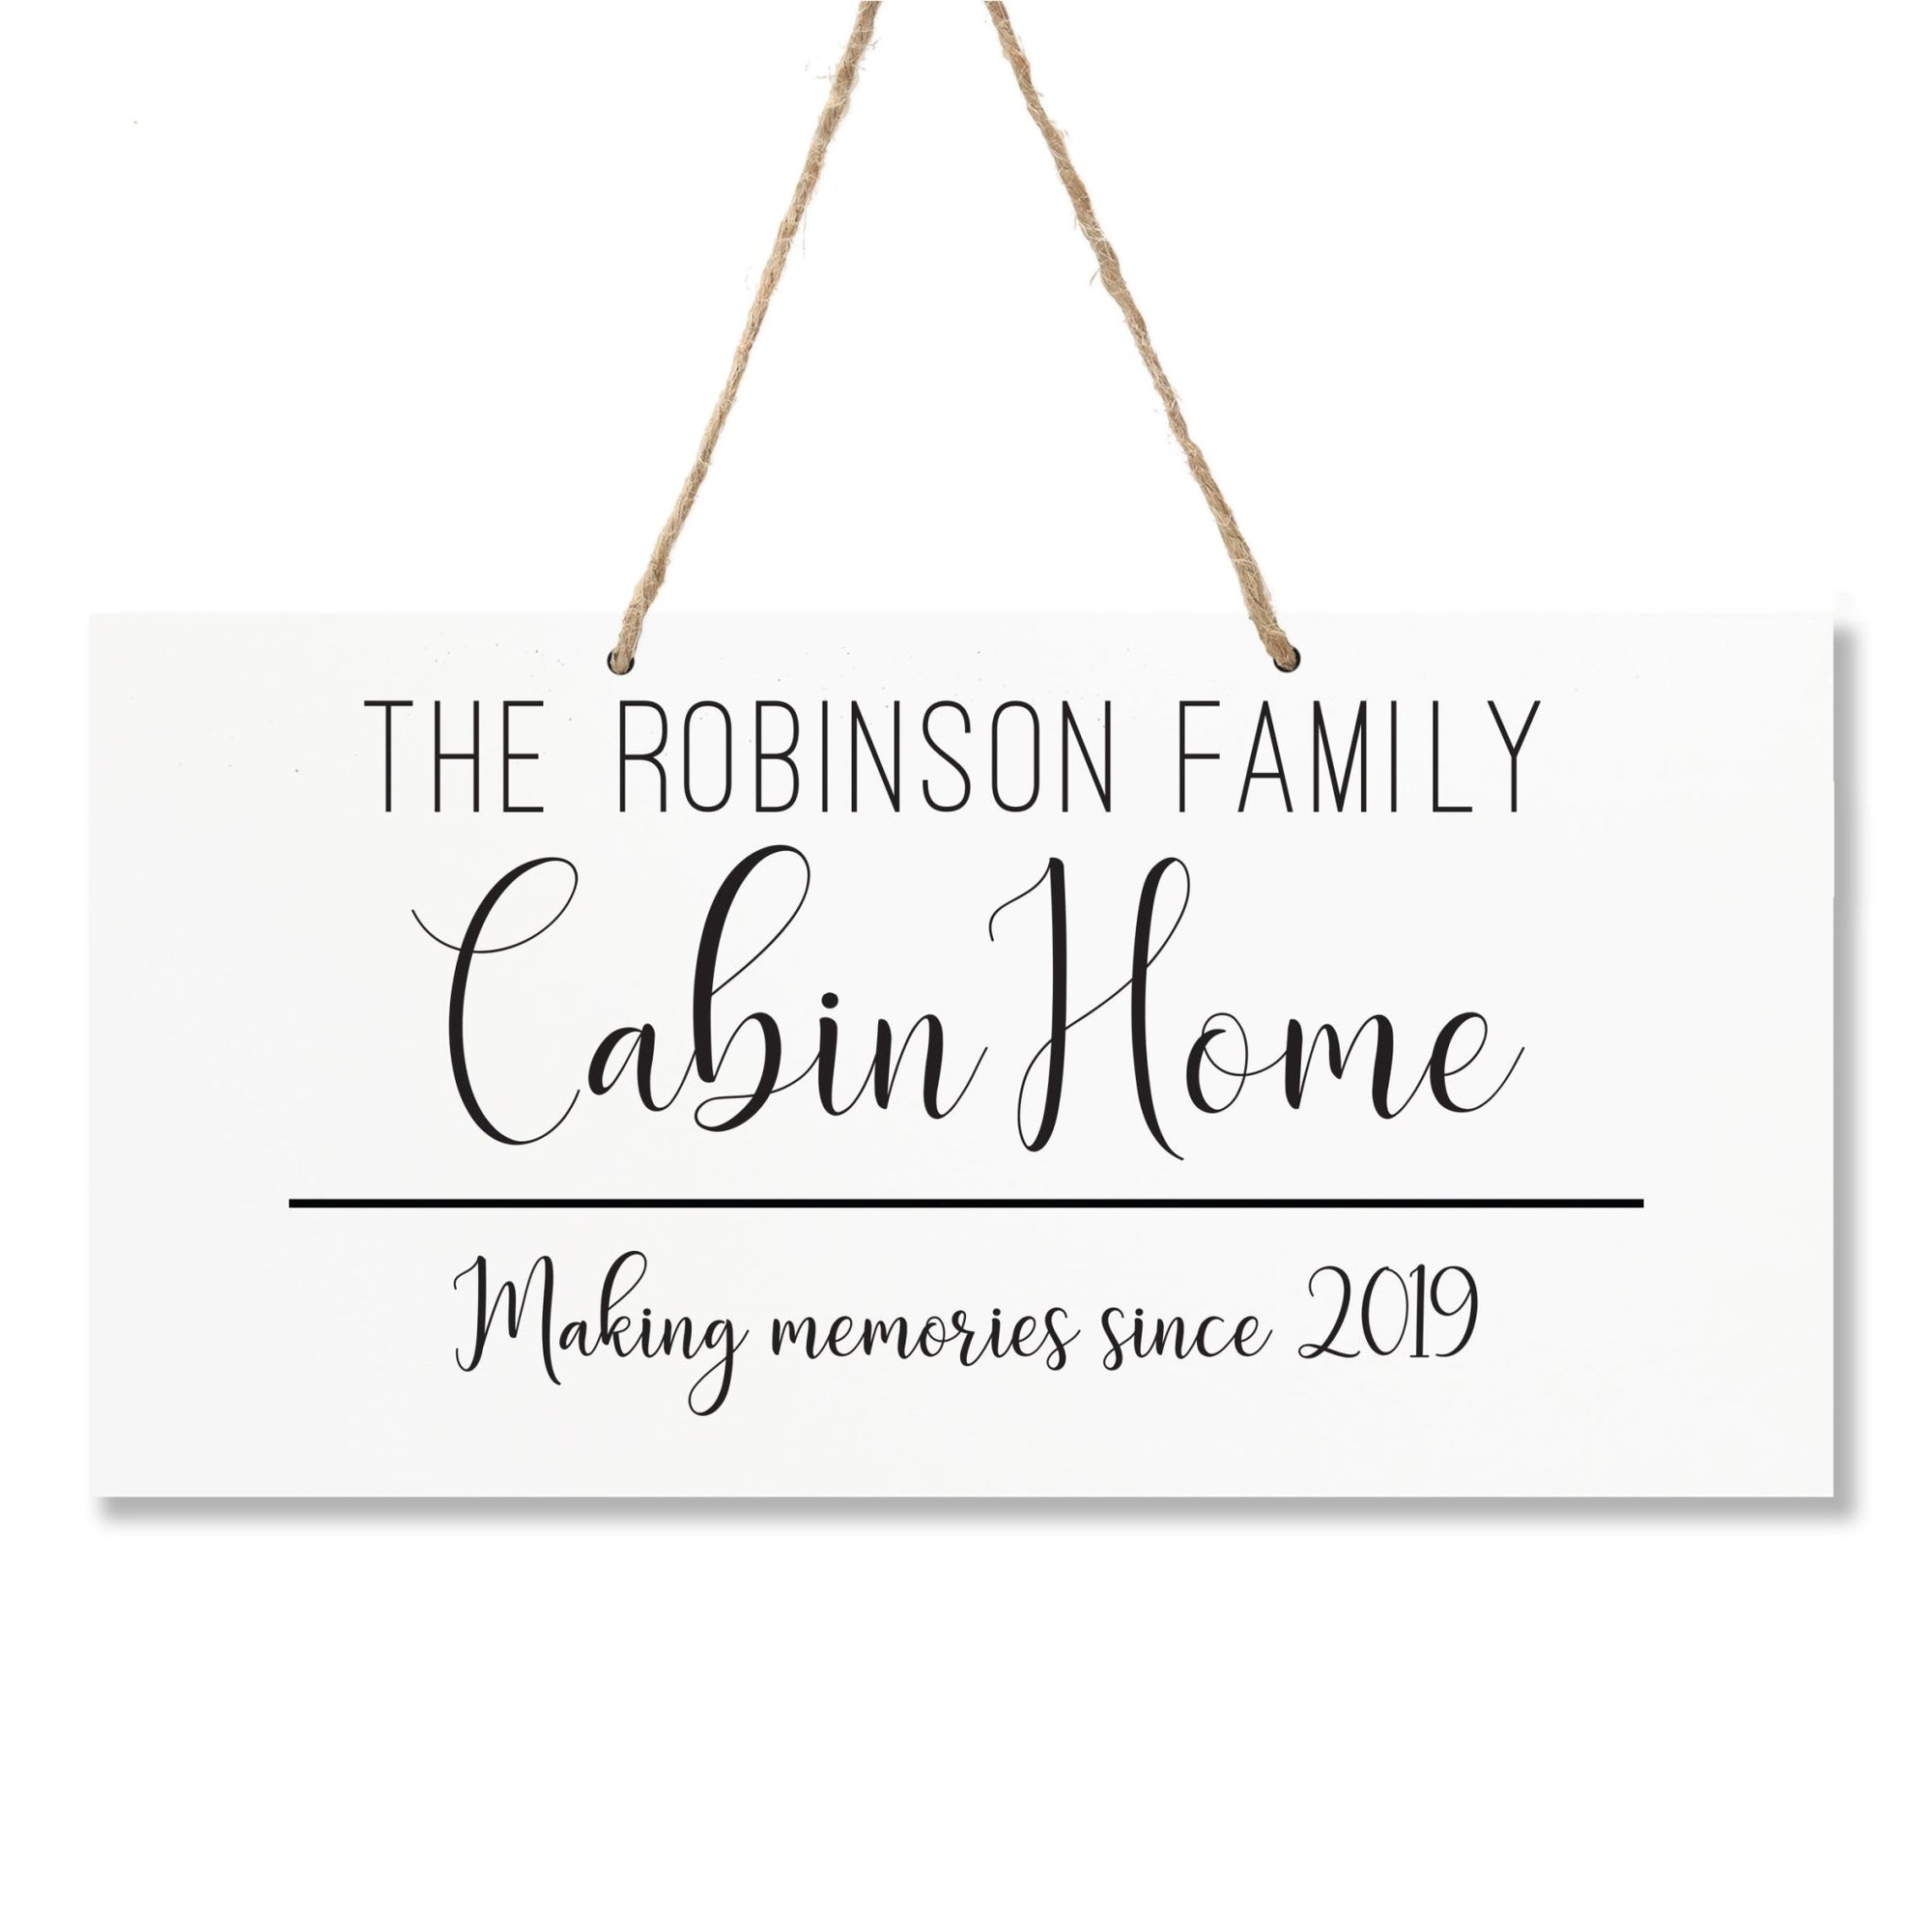 Personalized Family Name Sign For New Home - Cabin Home - LifeSong Milestones